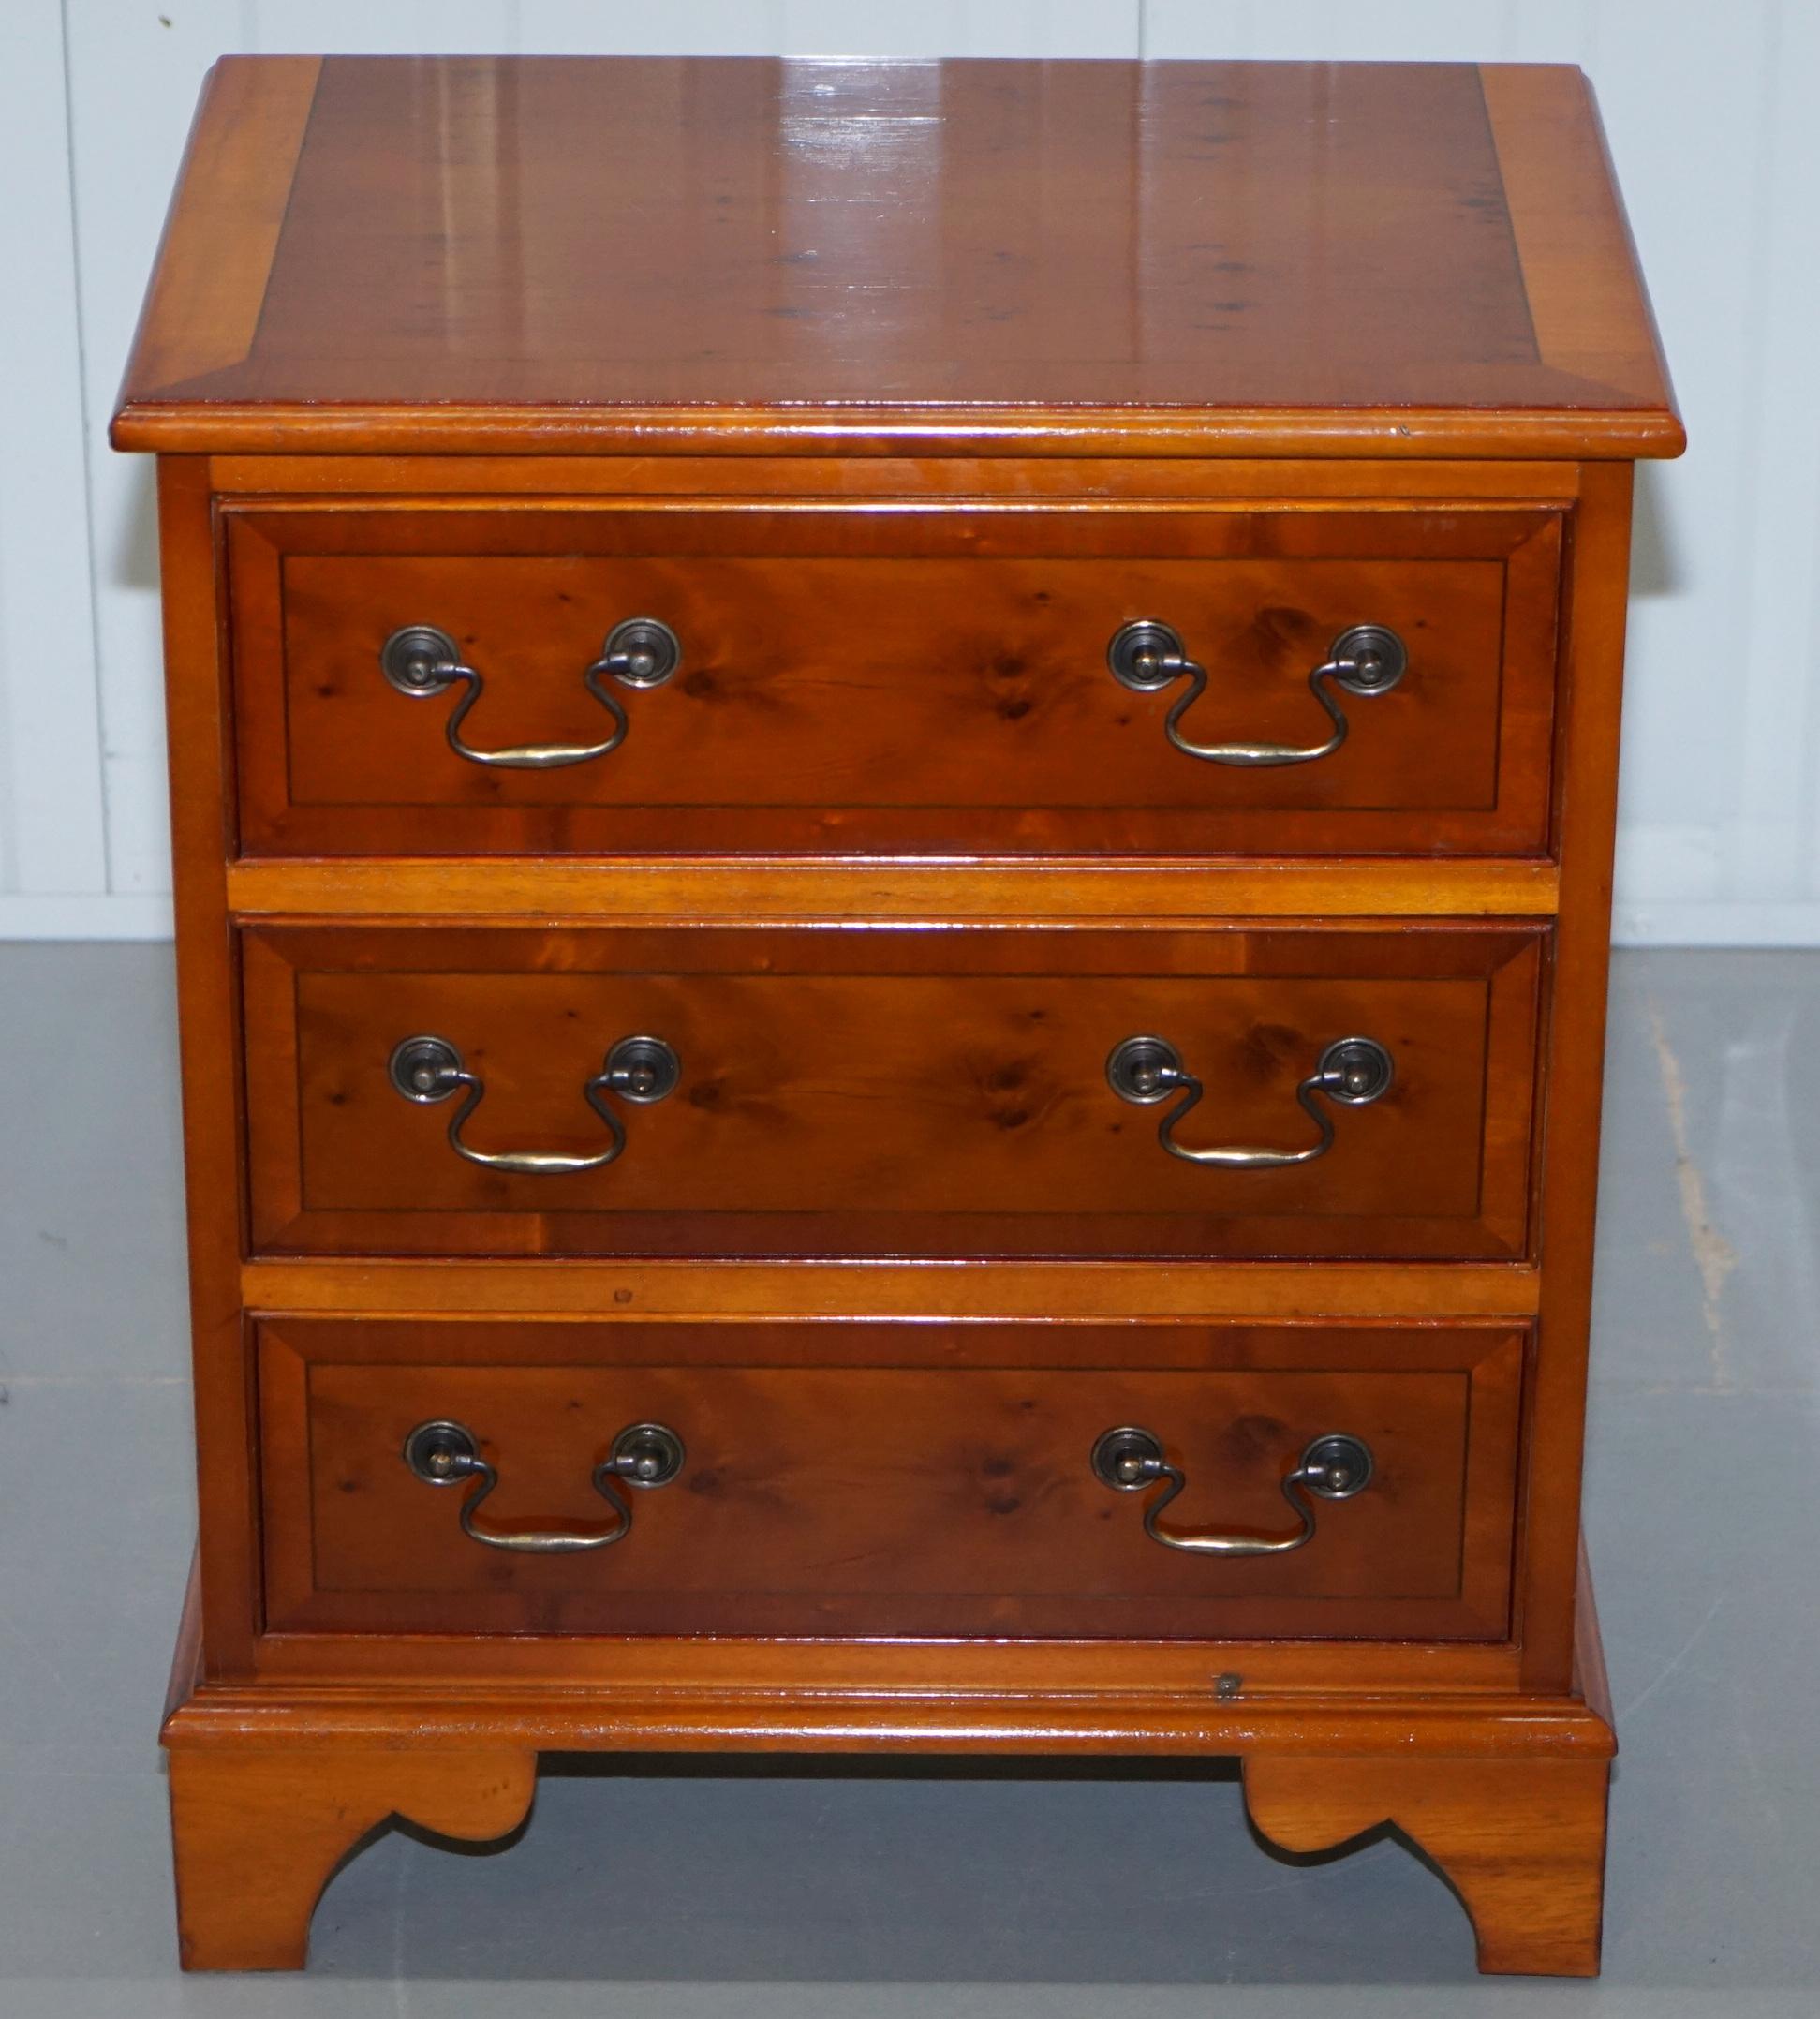 We are delighted to offer for sale this very good looking small chest of drawers

Please note the delivery fee listed is just a guide, it covers within the M25 only, for an accurate quote please send me your postcode

Ideal for an office or as a